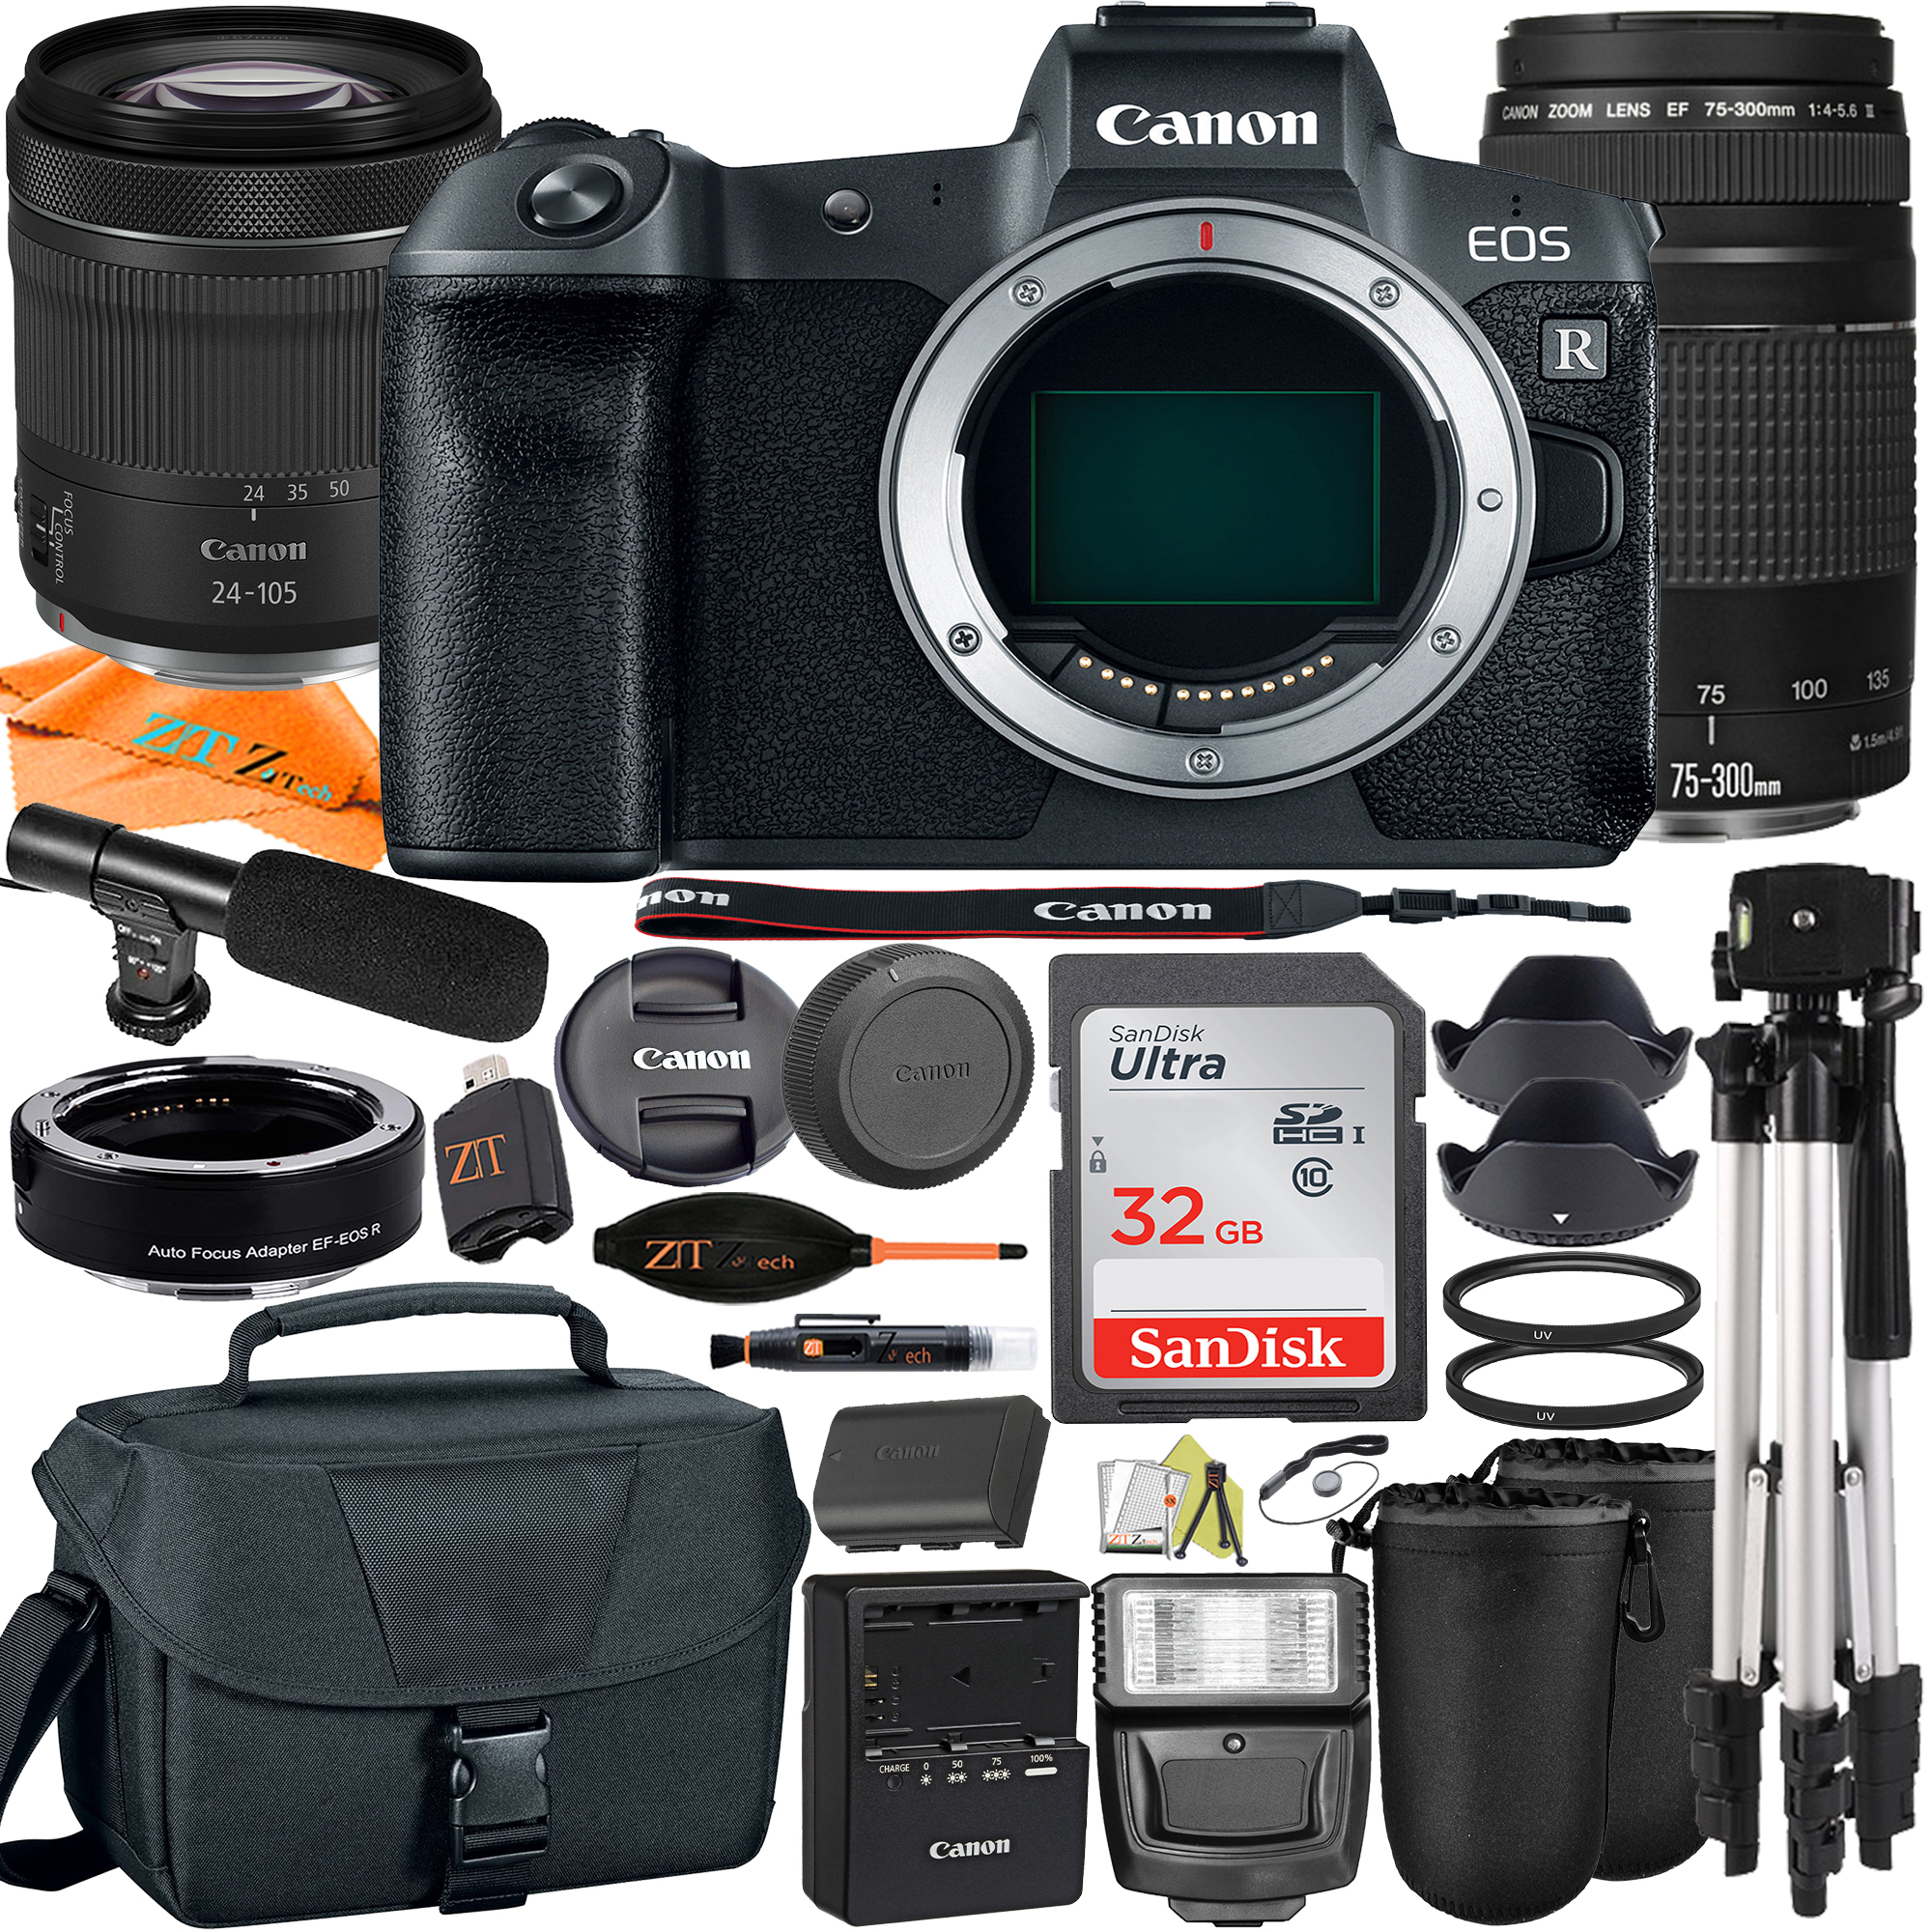 Canon EOS R Mirrorless Camera with RF24-105mm + 75-300mm Lens + Mount Adapter + SanDisk 32GB + ZeeTech Accessory